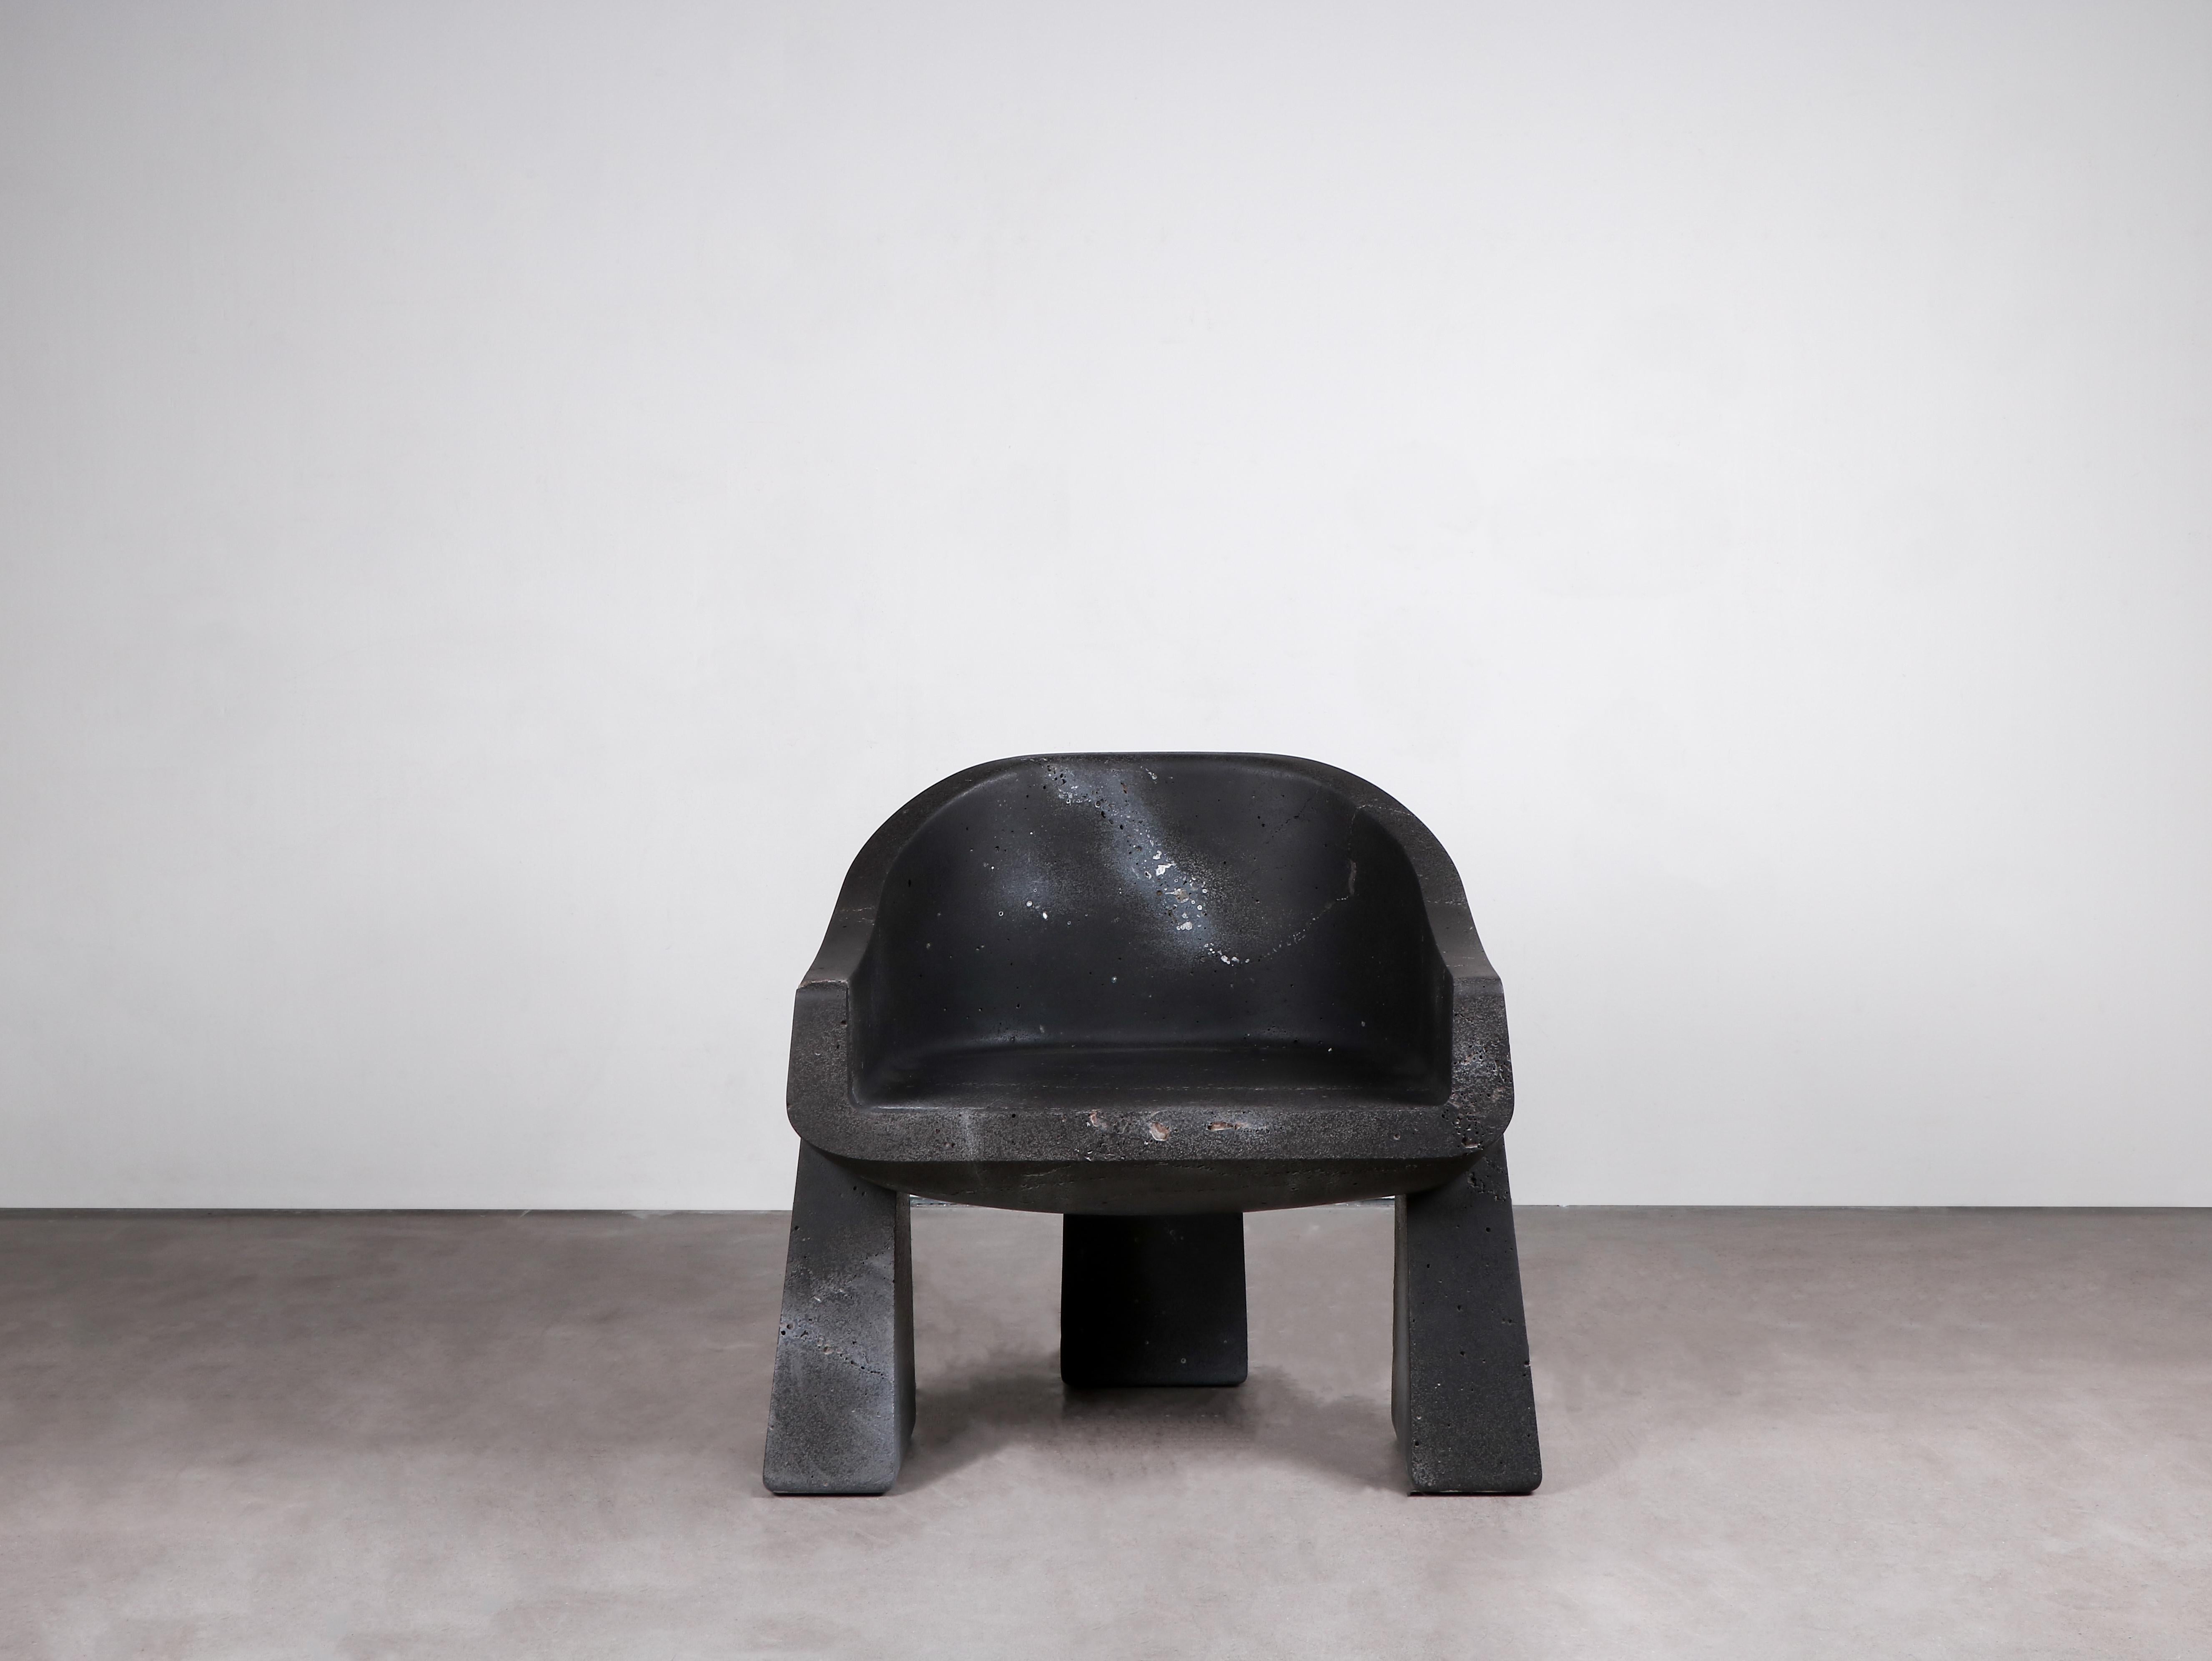 Klot basalt chair by Lucas Tyra Morten
Limited Edition of 6 + 1 AP.
Signed.
Dimensions: W 60 x D 60 H 57 cm.
Material: Basalt.

Objects comes with a 